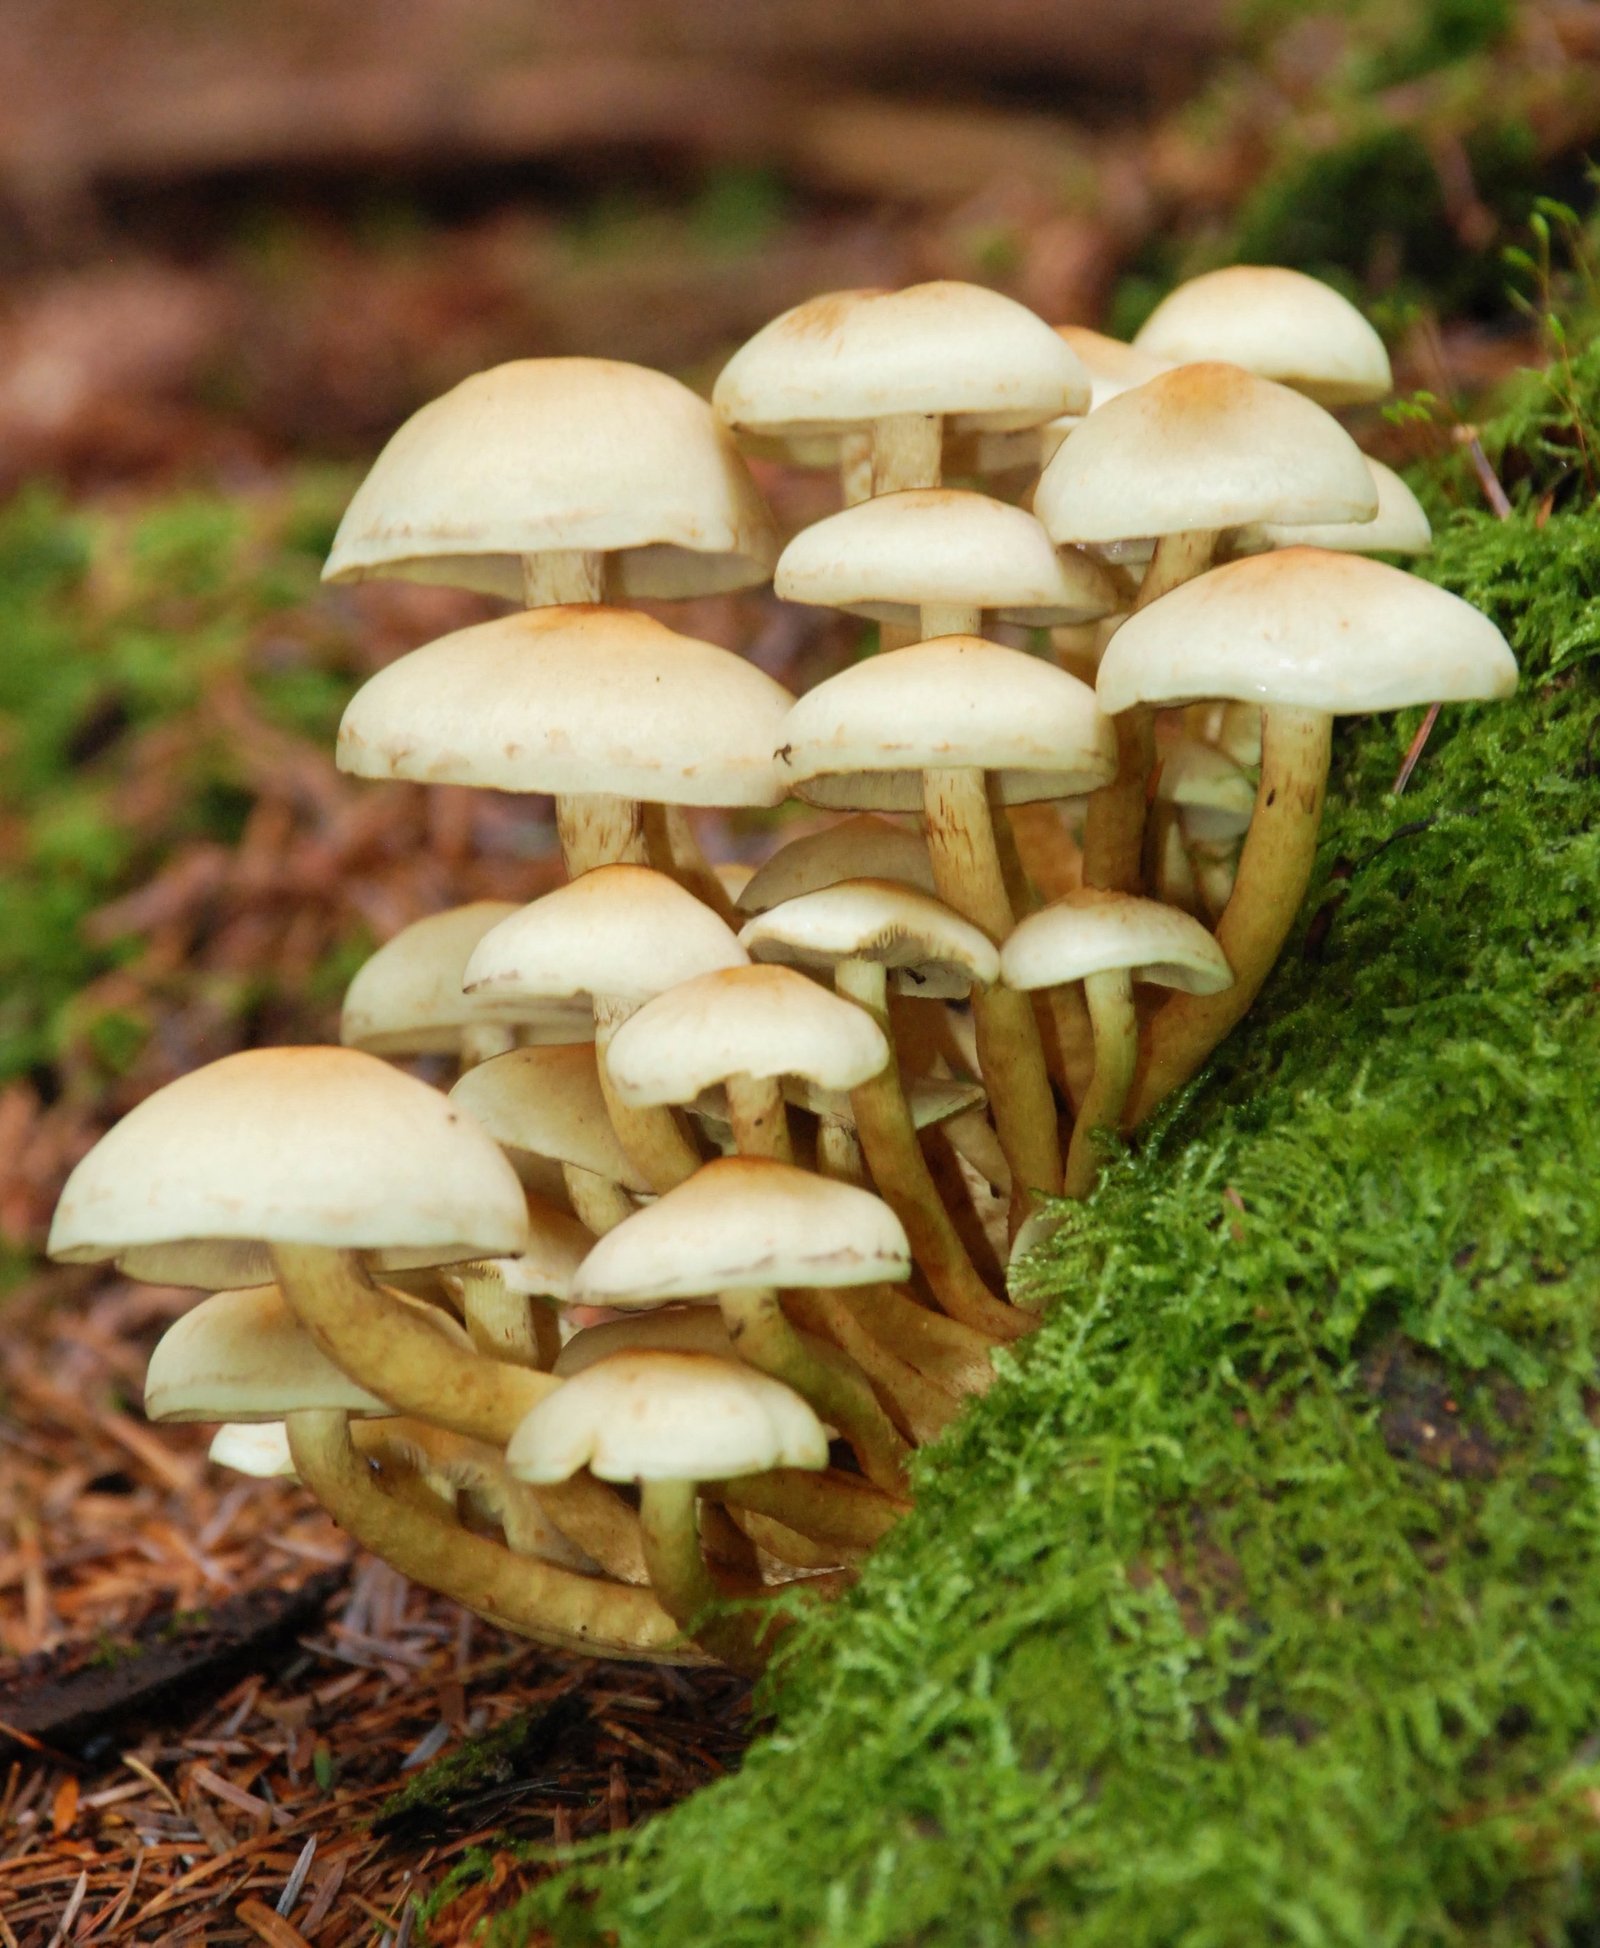 DBT invites suitable ideas on fungi as industrial important products